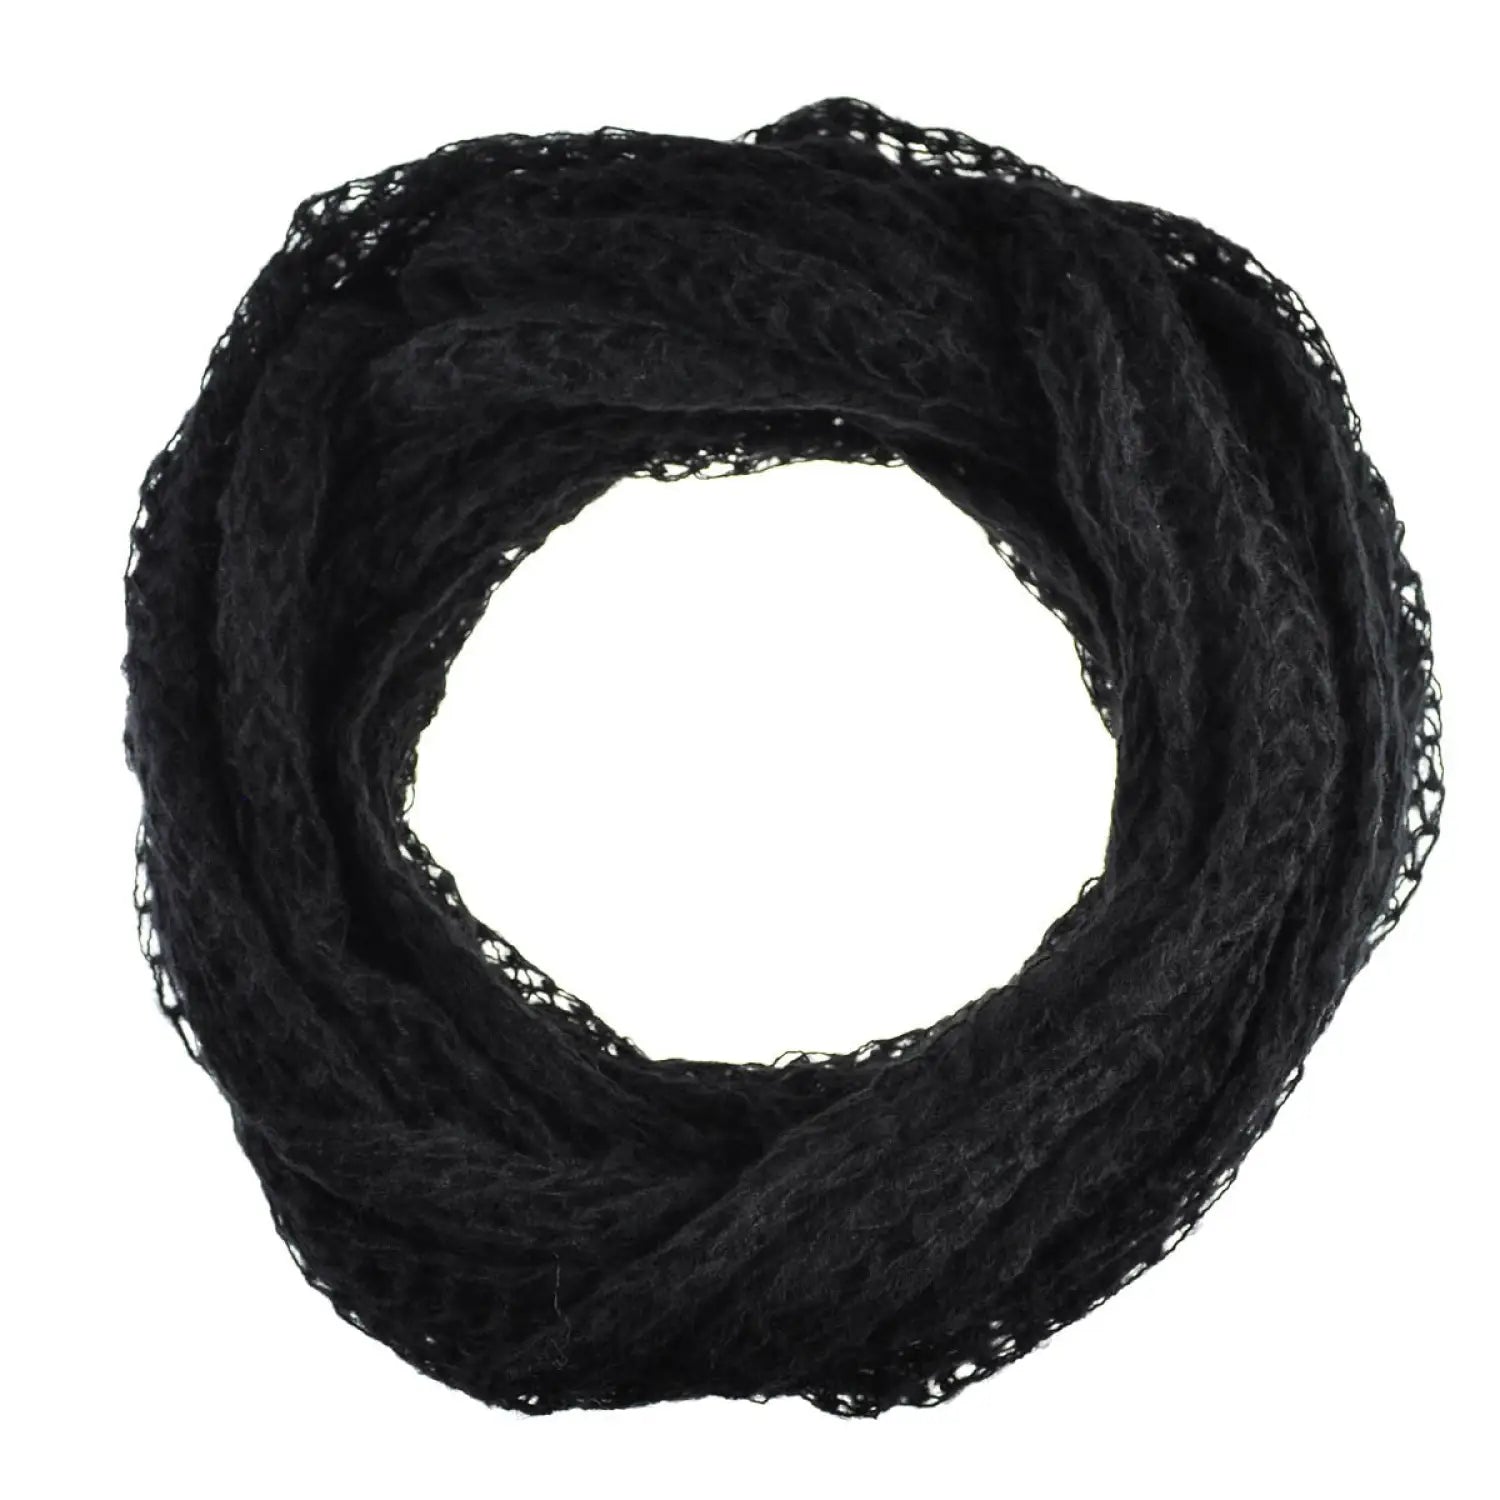 Black soft knitted snood scarf on white background